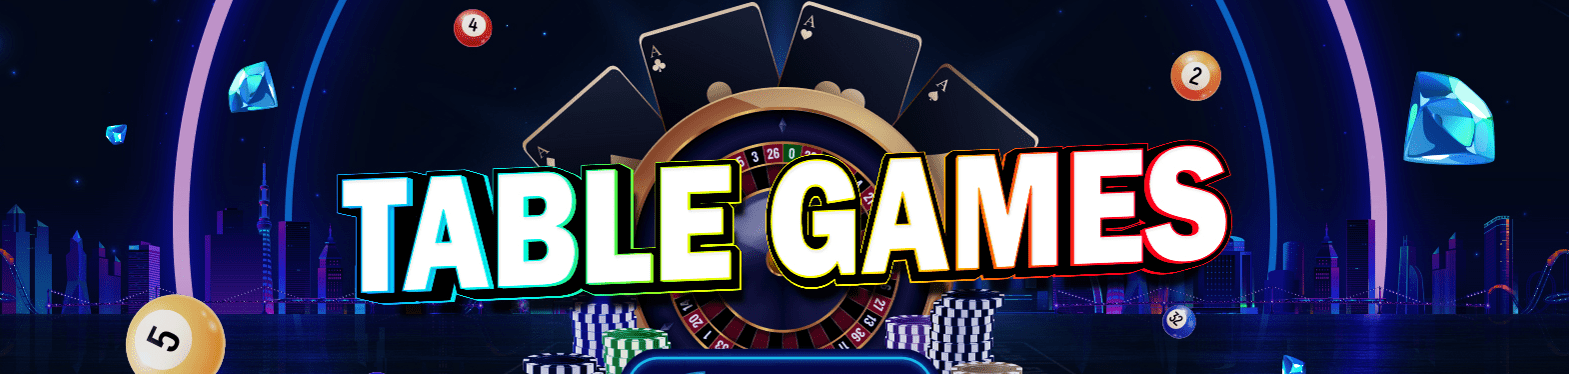 Table gAMES Online Casino Games 